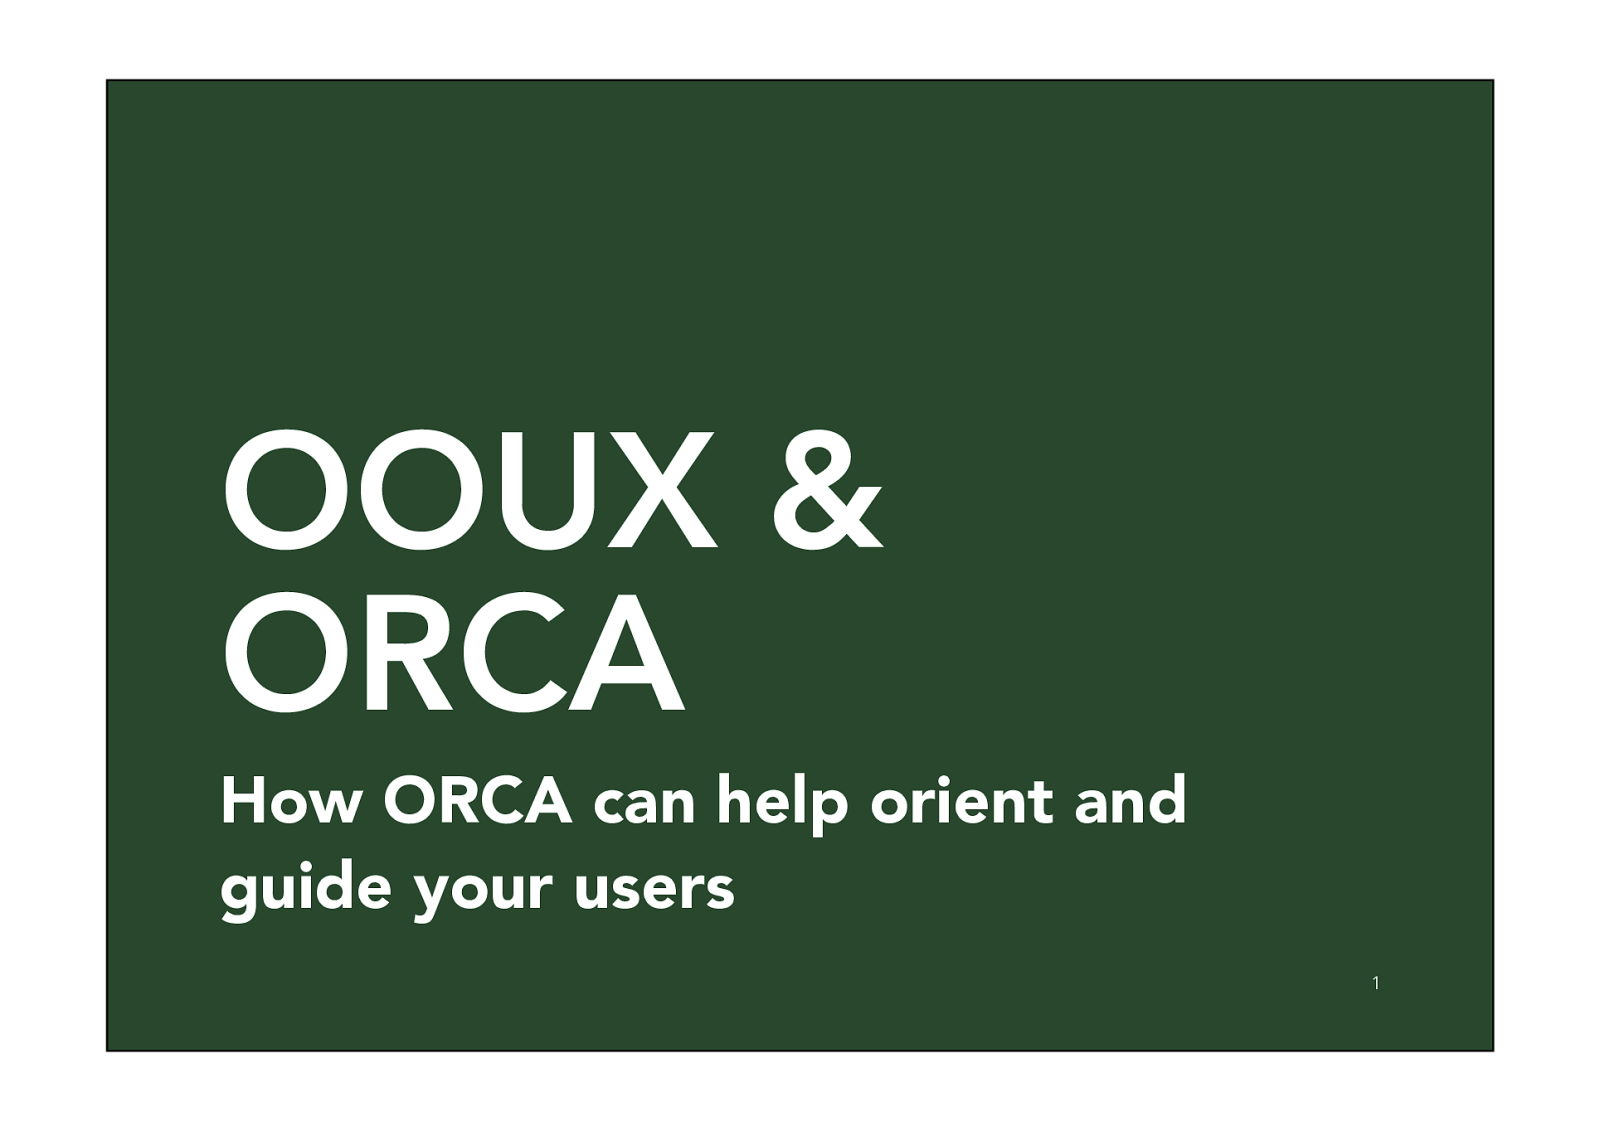 How OOUX + ORCA can help orient and guide our users with Upma Singh